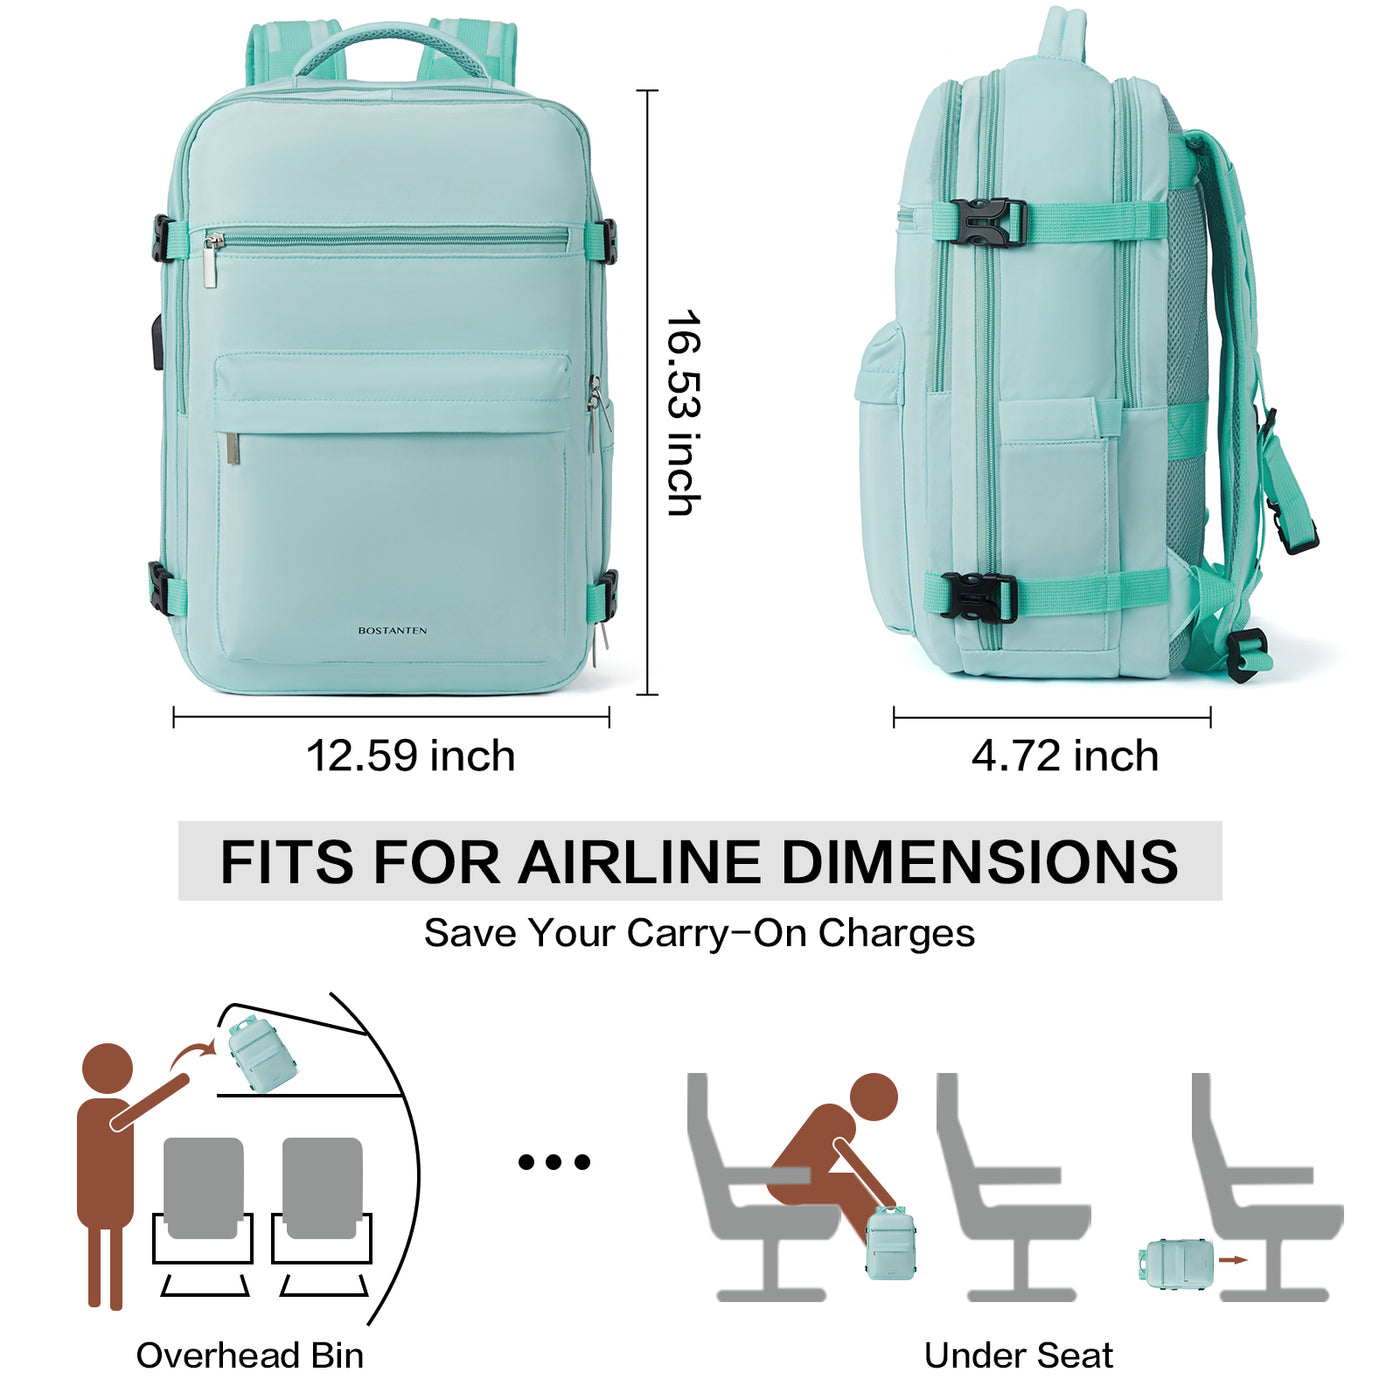 Stylish and Functional Fashion Backpack for Women - Waterproof and Flight Approved